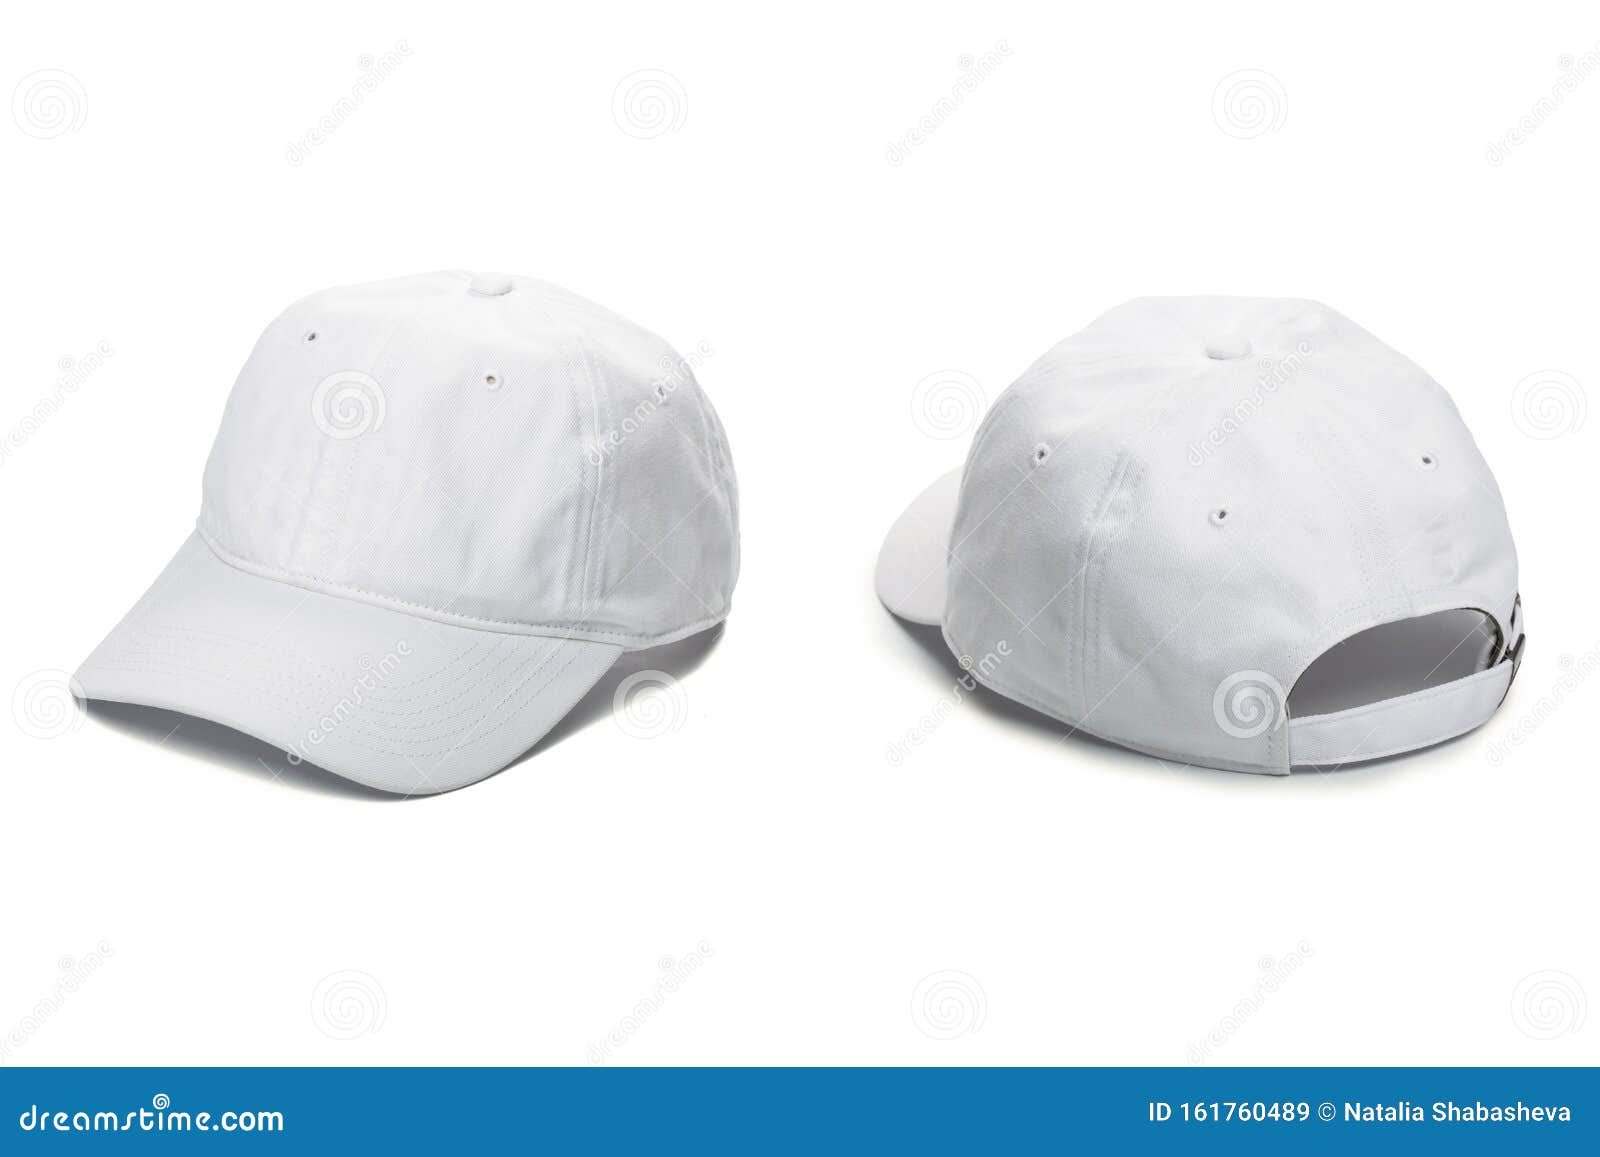 WhiteBaseball Cap Isolated on White Background. Front and Back View ...